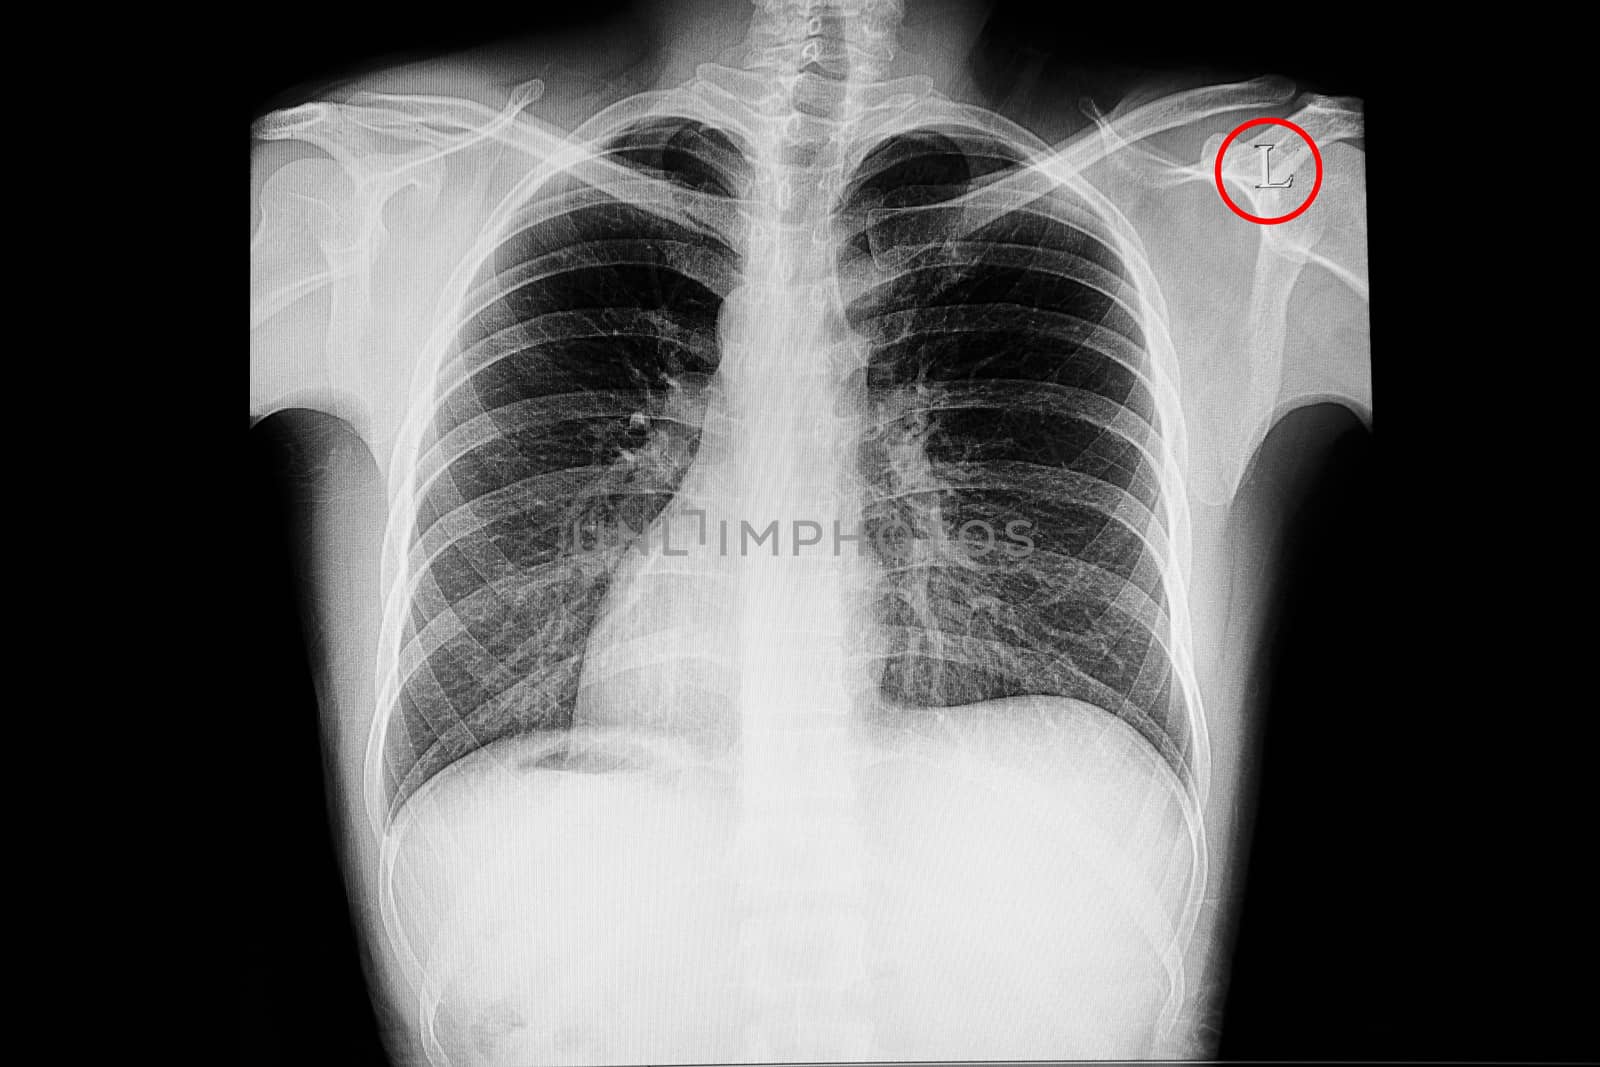 Chest x-ray showing situs inversus (situs transversus or oppositus), a congenital condition in which the major visceral organs are reversed or mirrored from their normal positions. In this case the cardiac shadow is s on the right side